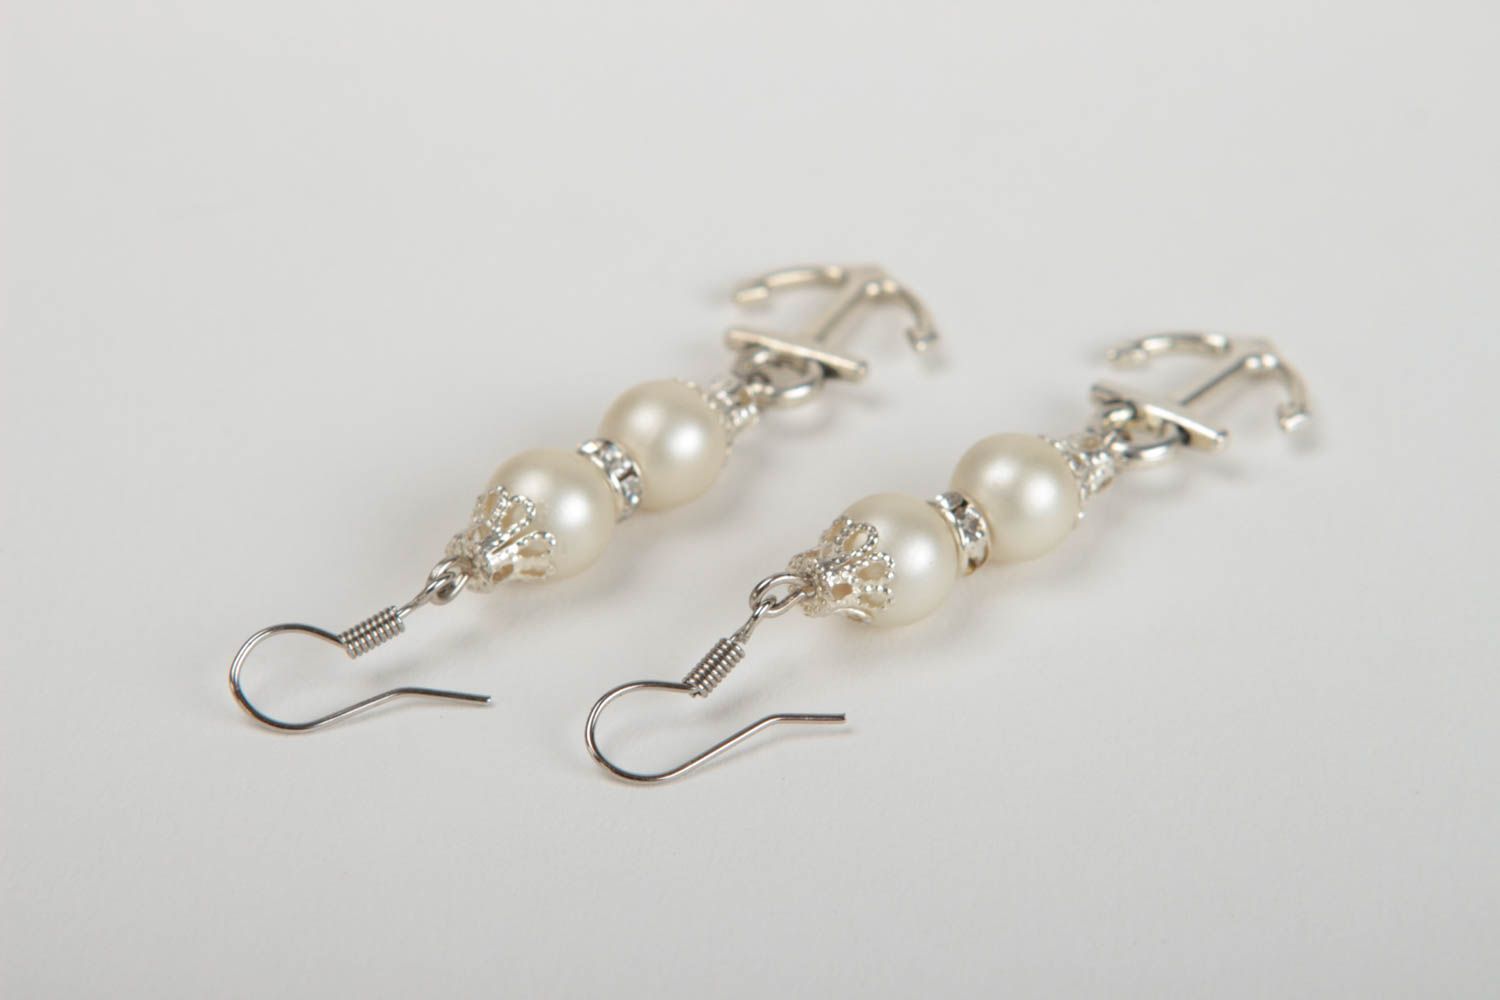 Handcrafted metal earrings with pearl beads designer jewelry gifts for her photo 4